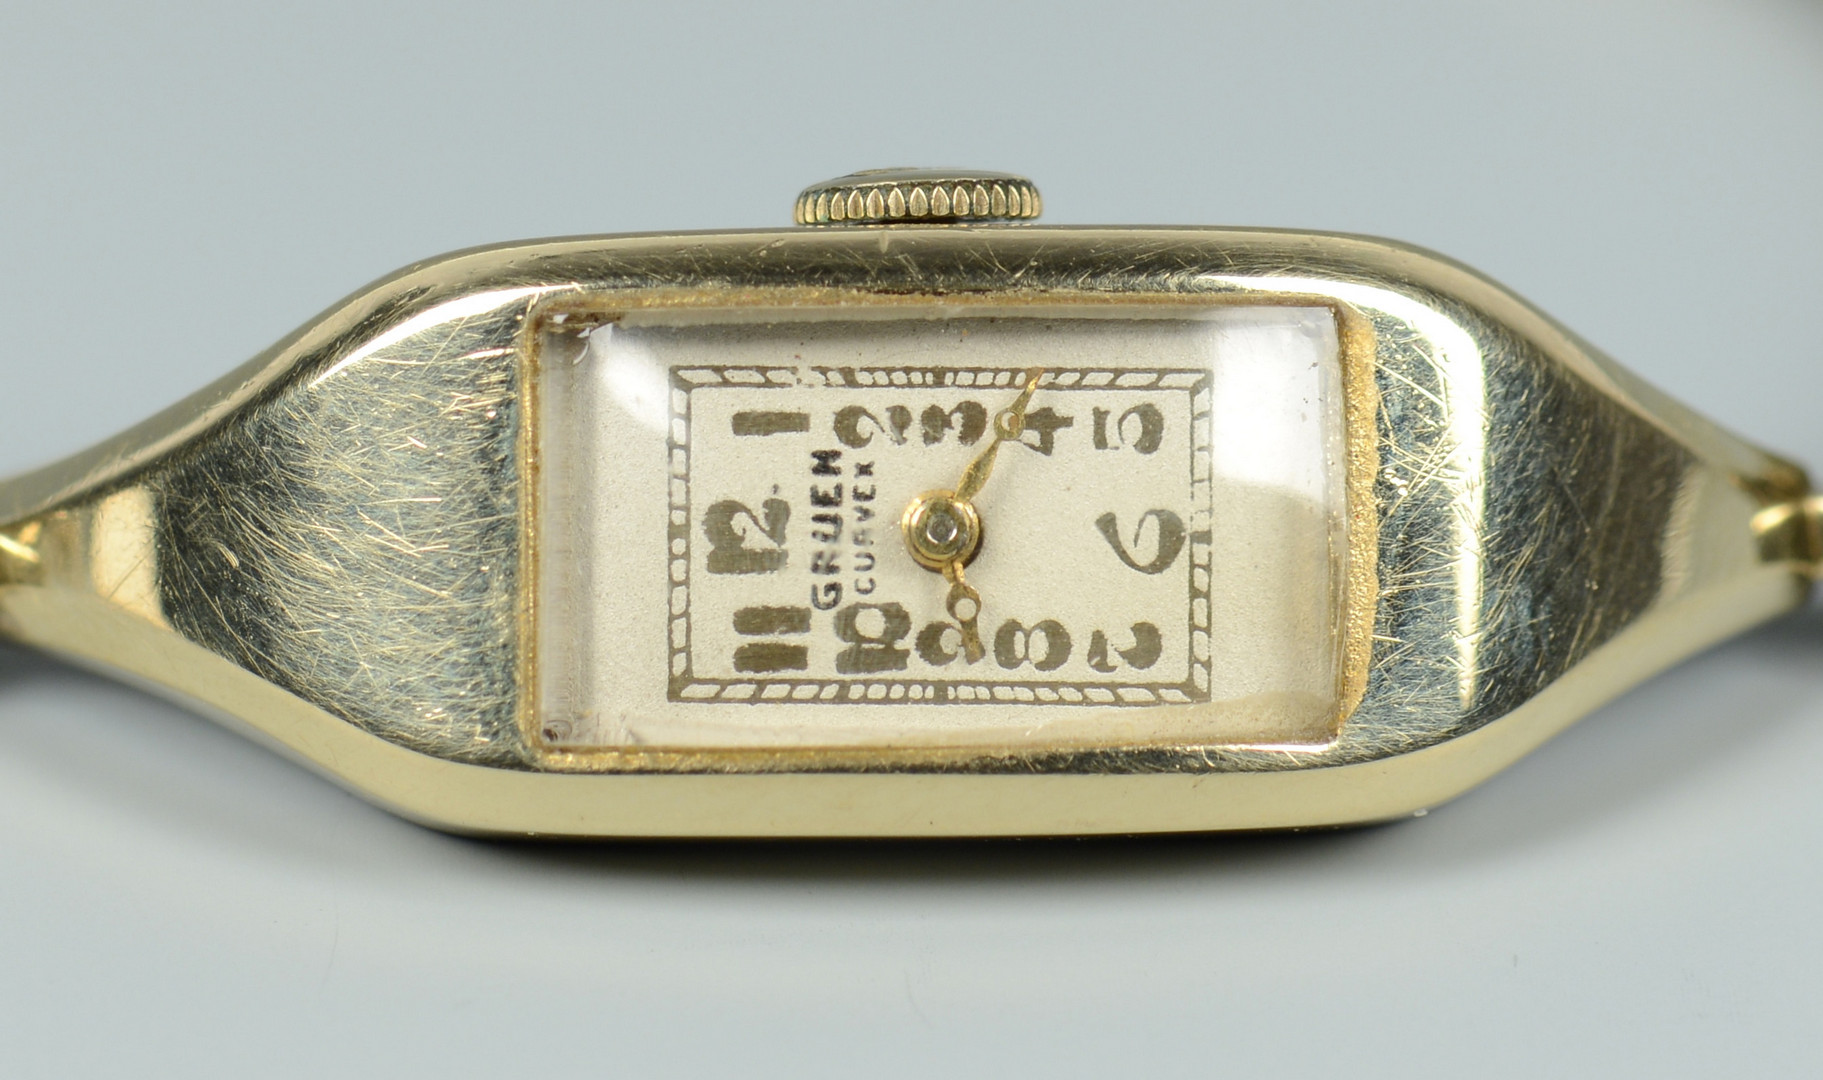 Lot 498: 2 Rings and 1 Watch, 18K & 14K